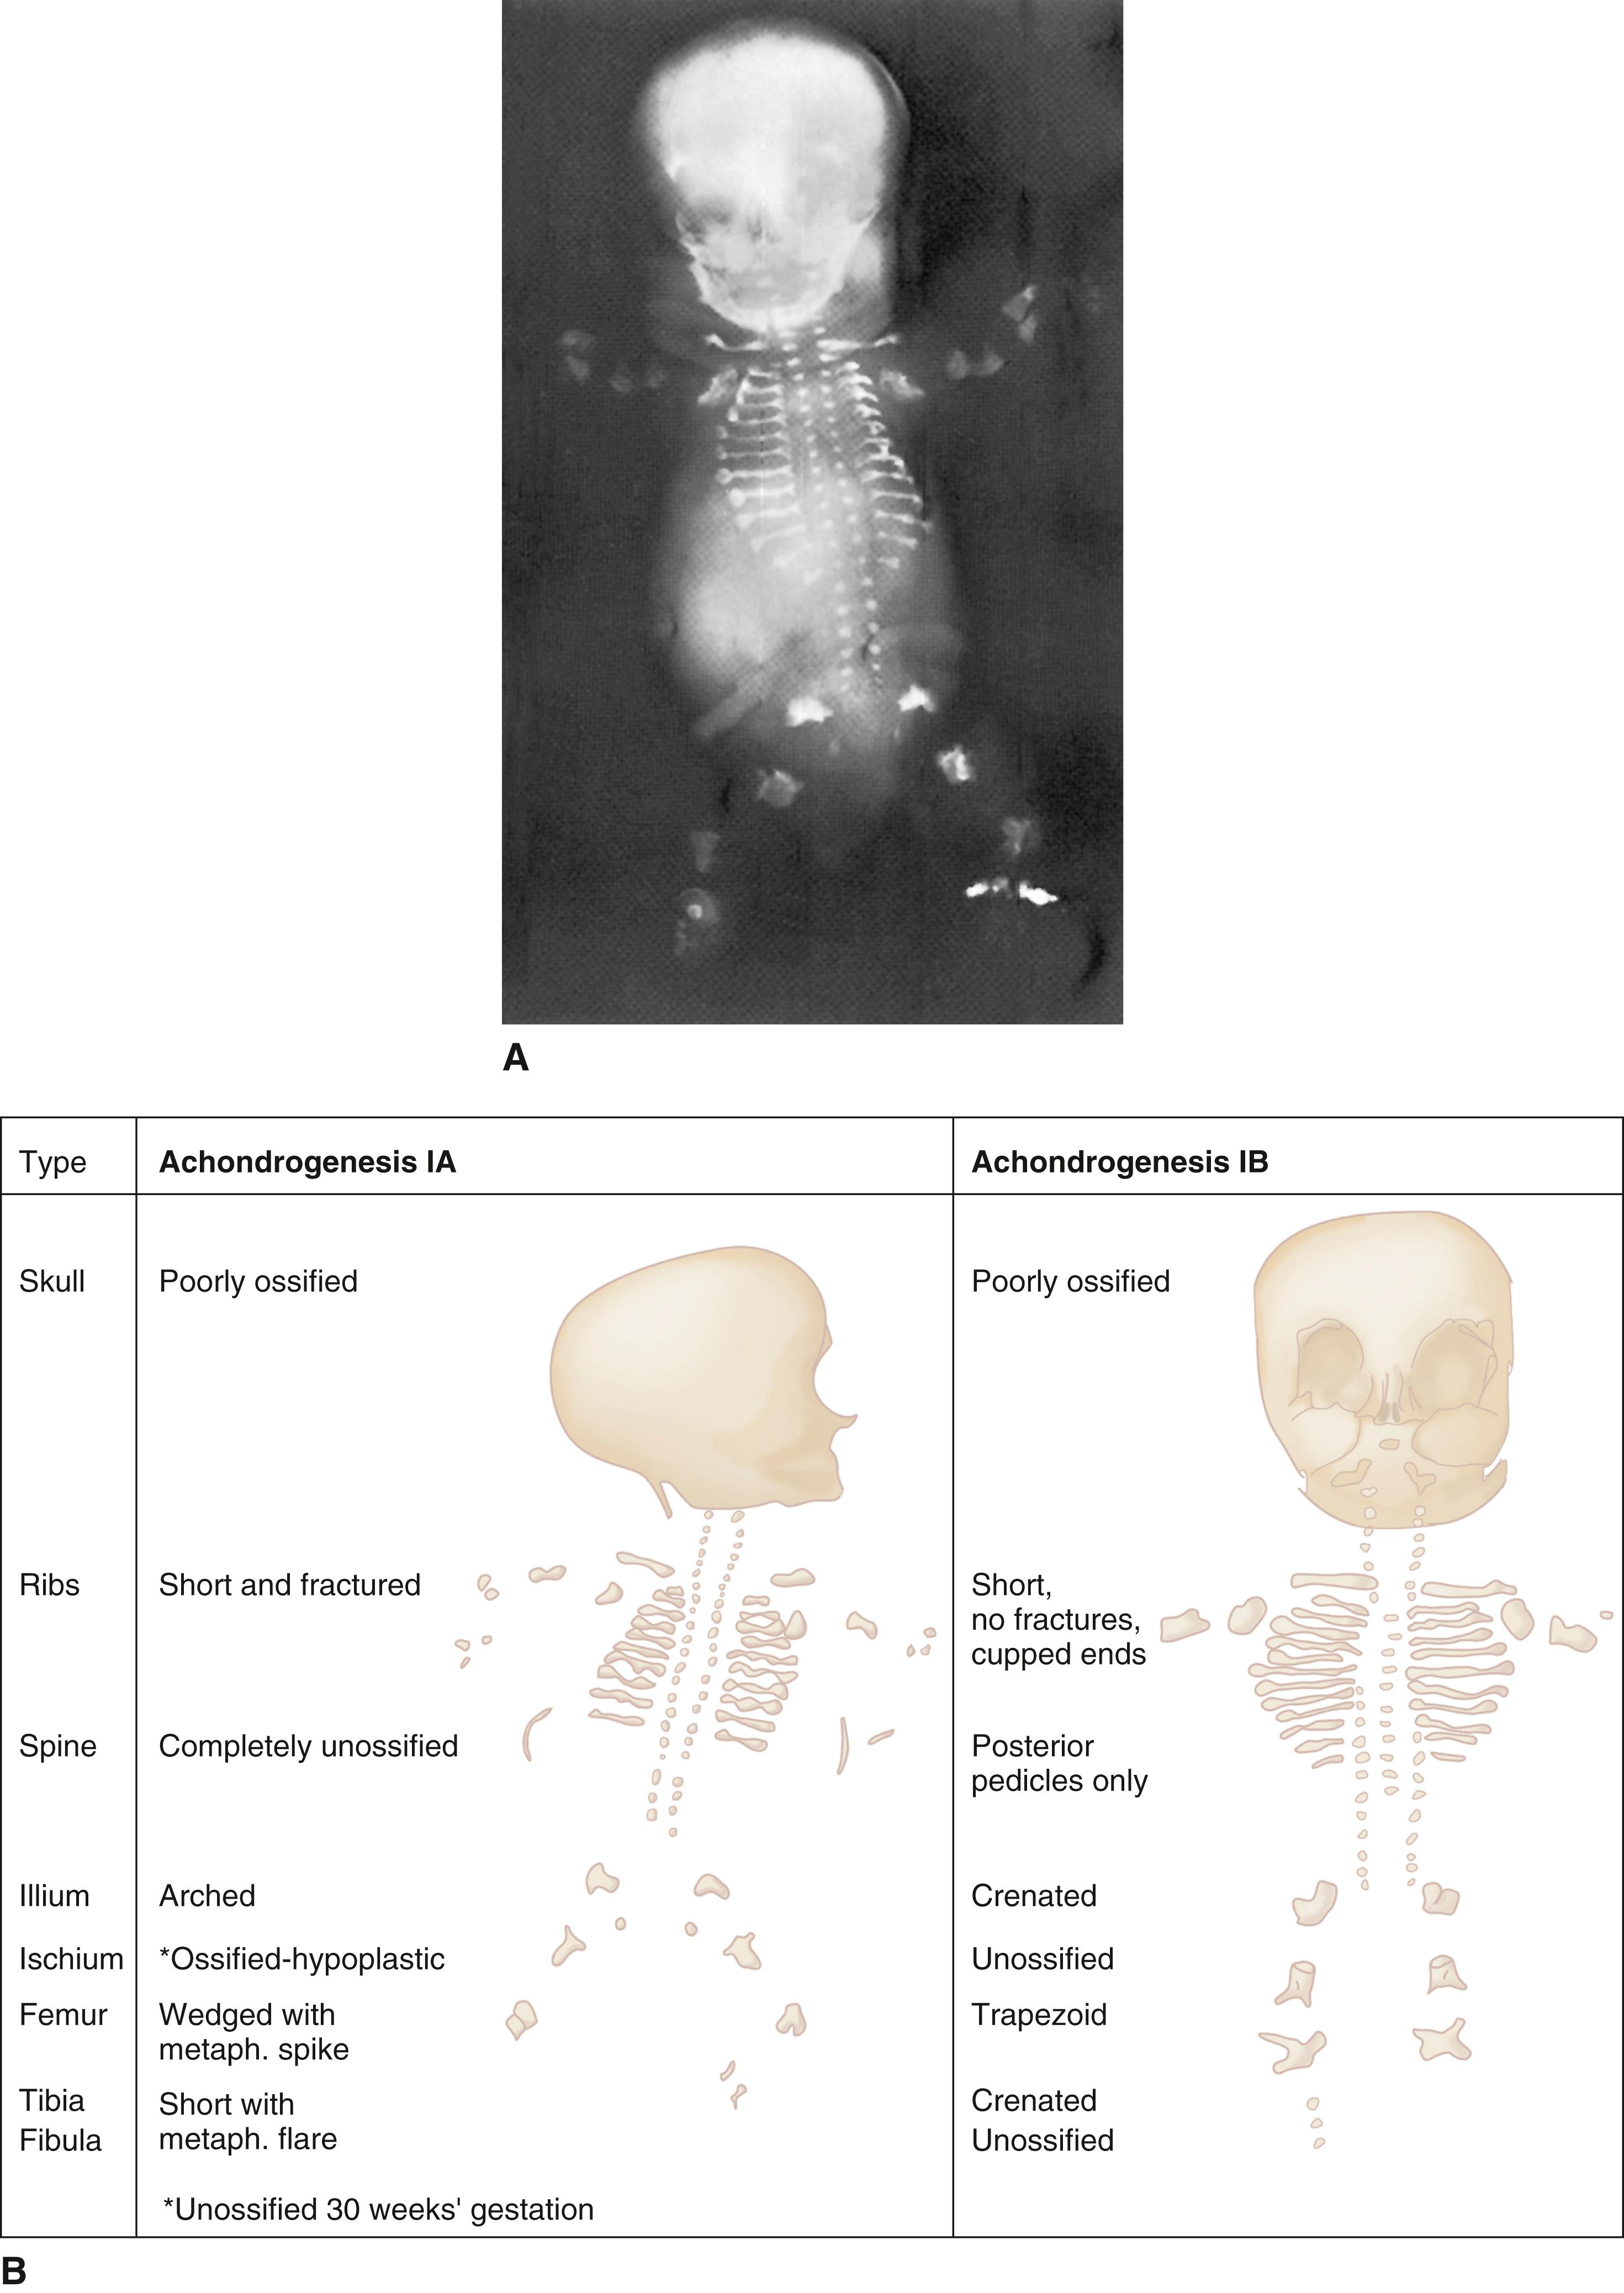 FIGURE 1, A, Stillborn infant at 30 weeks’ gestation with achondrogenesis type IA. B, Radiographic features that differentiate type IA from type IB are delineated on the drawings.